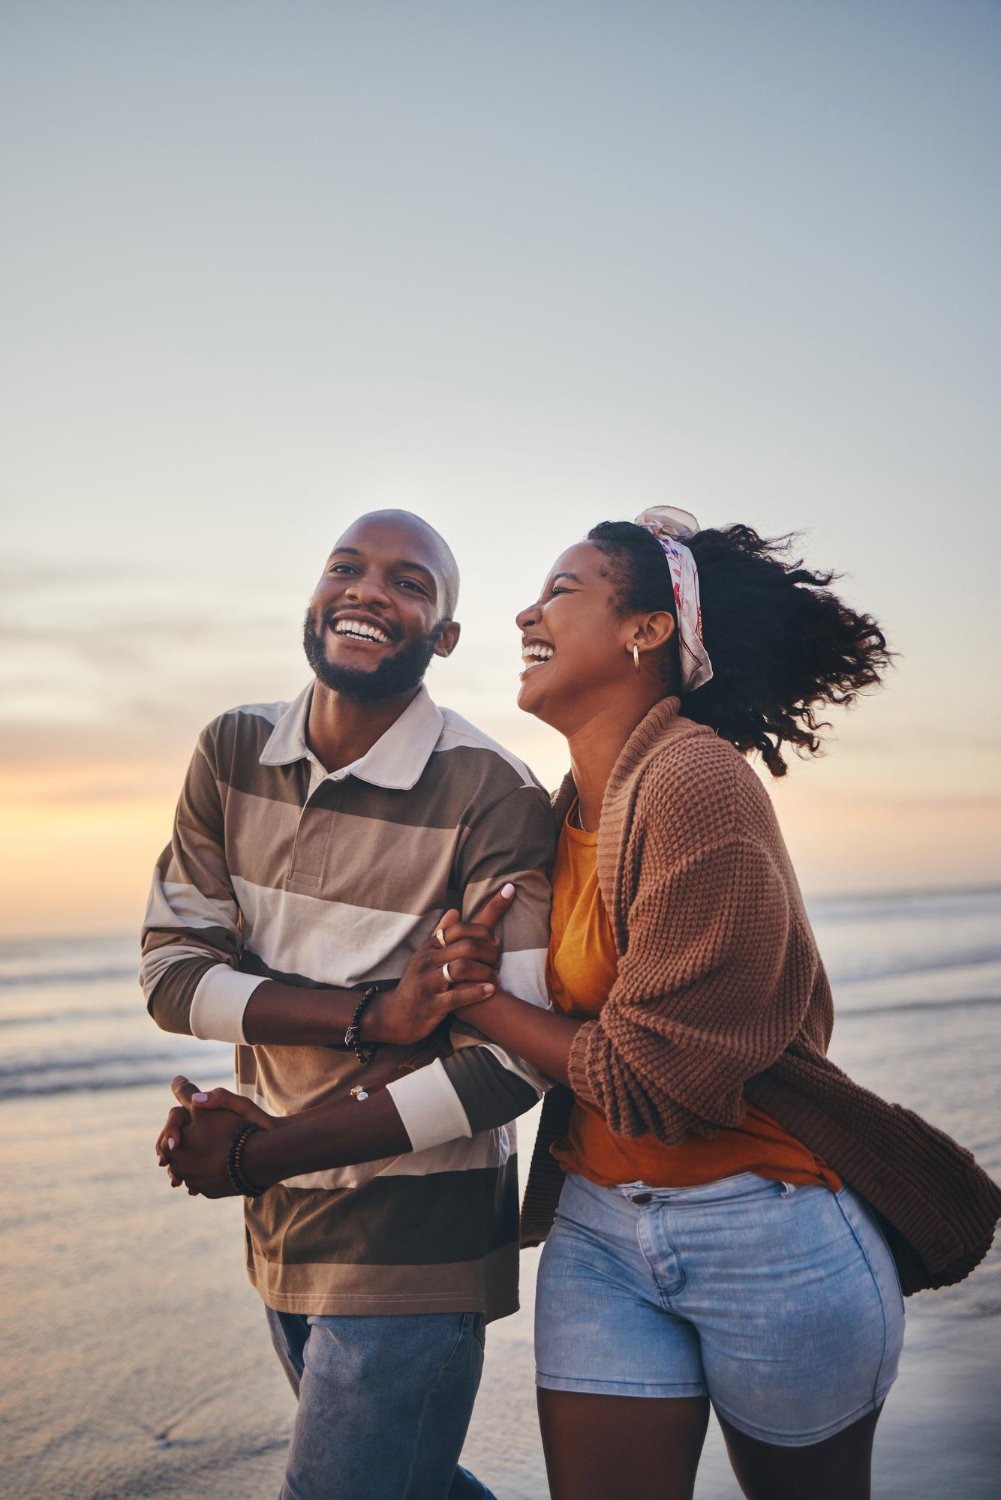 Happy couple love and travel at the beach holding hands on date quality time and romance at sunset Black woman and man laughing and walking together by the ocean on honeymoon during summer